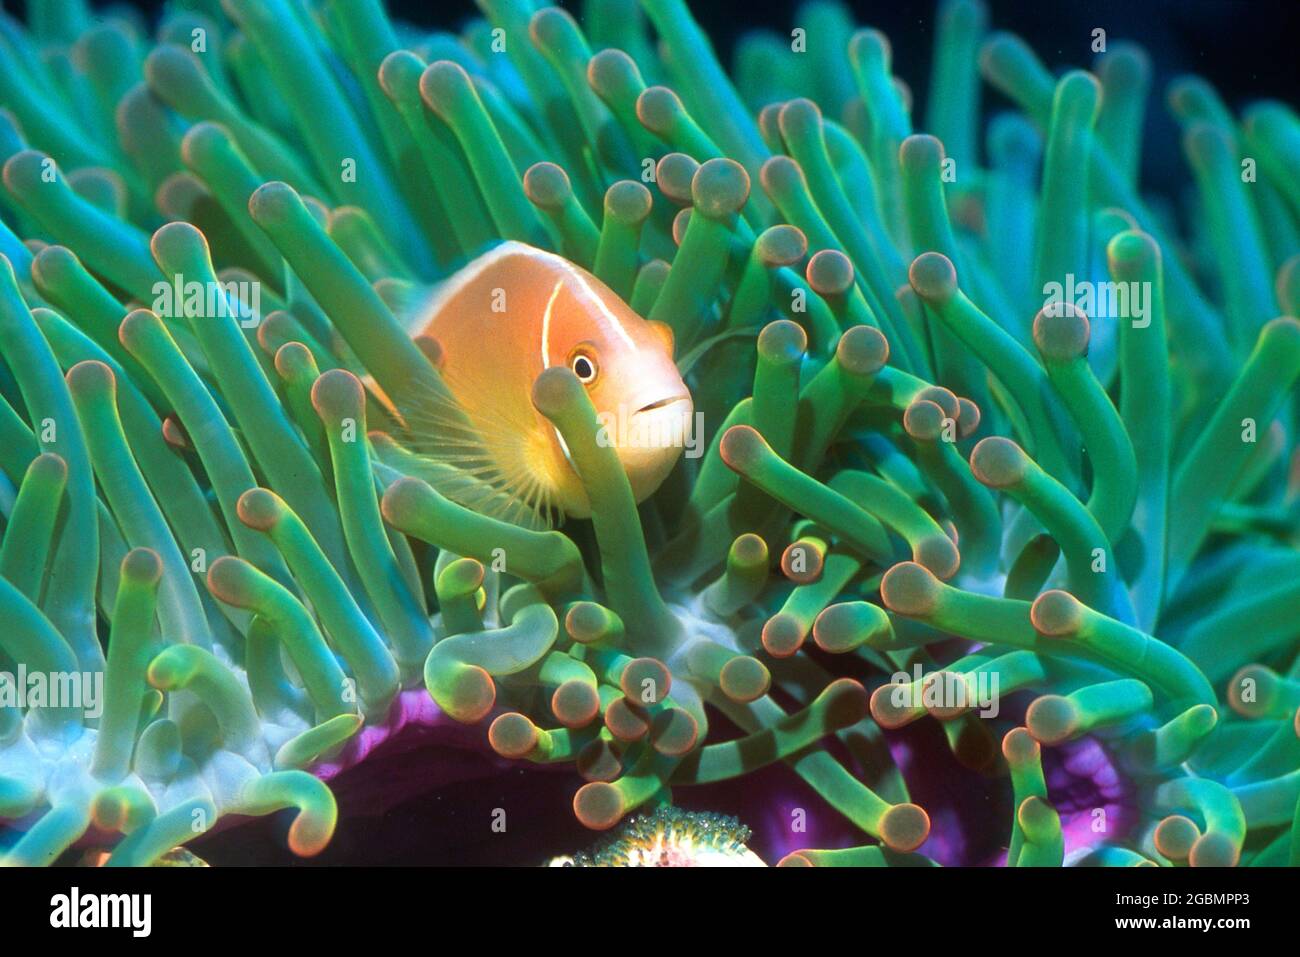 Clownfish nestled in anemone tentacles, South Pacific Stock Photo